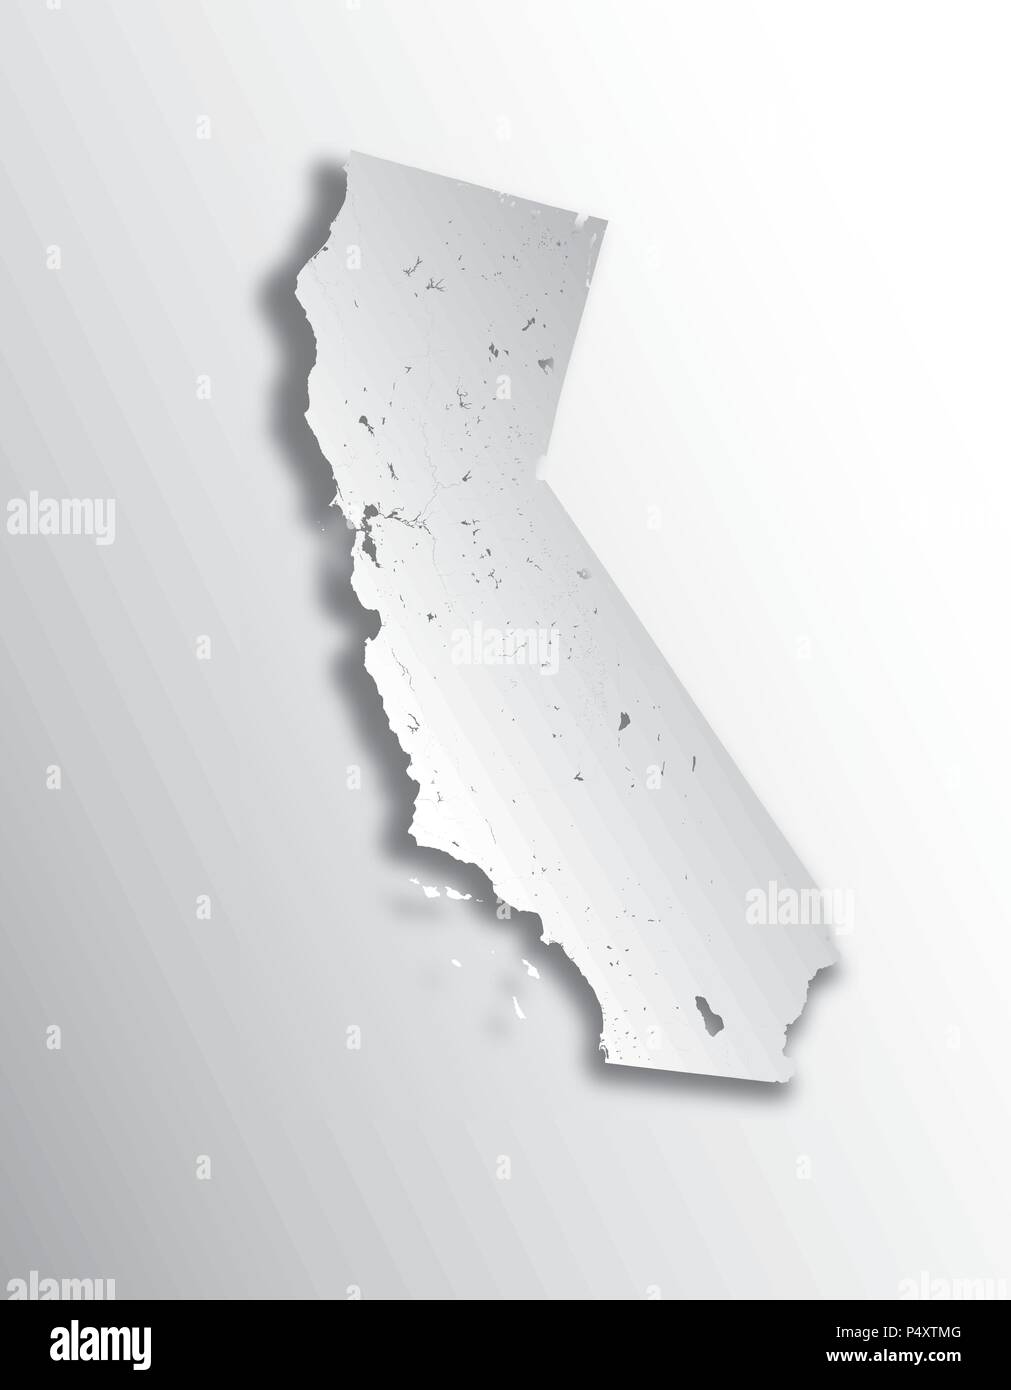 U.S. states - map of California with paper cut effect. Hand made. Rivers and lakes are shown. Please look at my other images of cartographic series -  Stock Vector